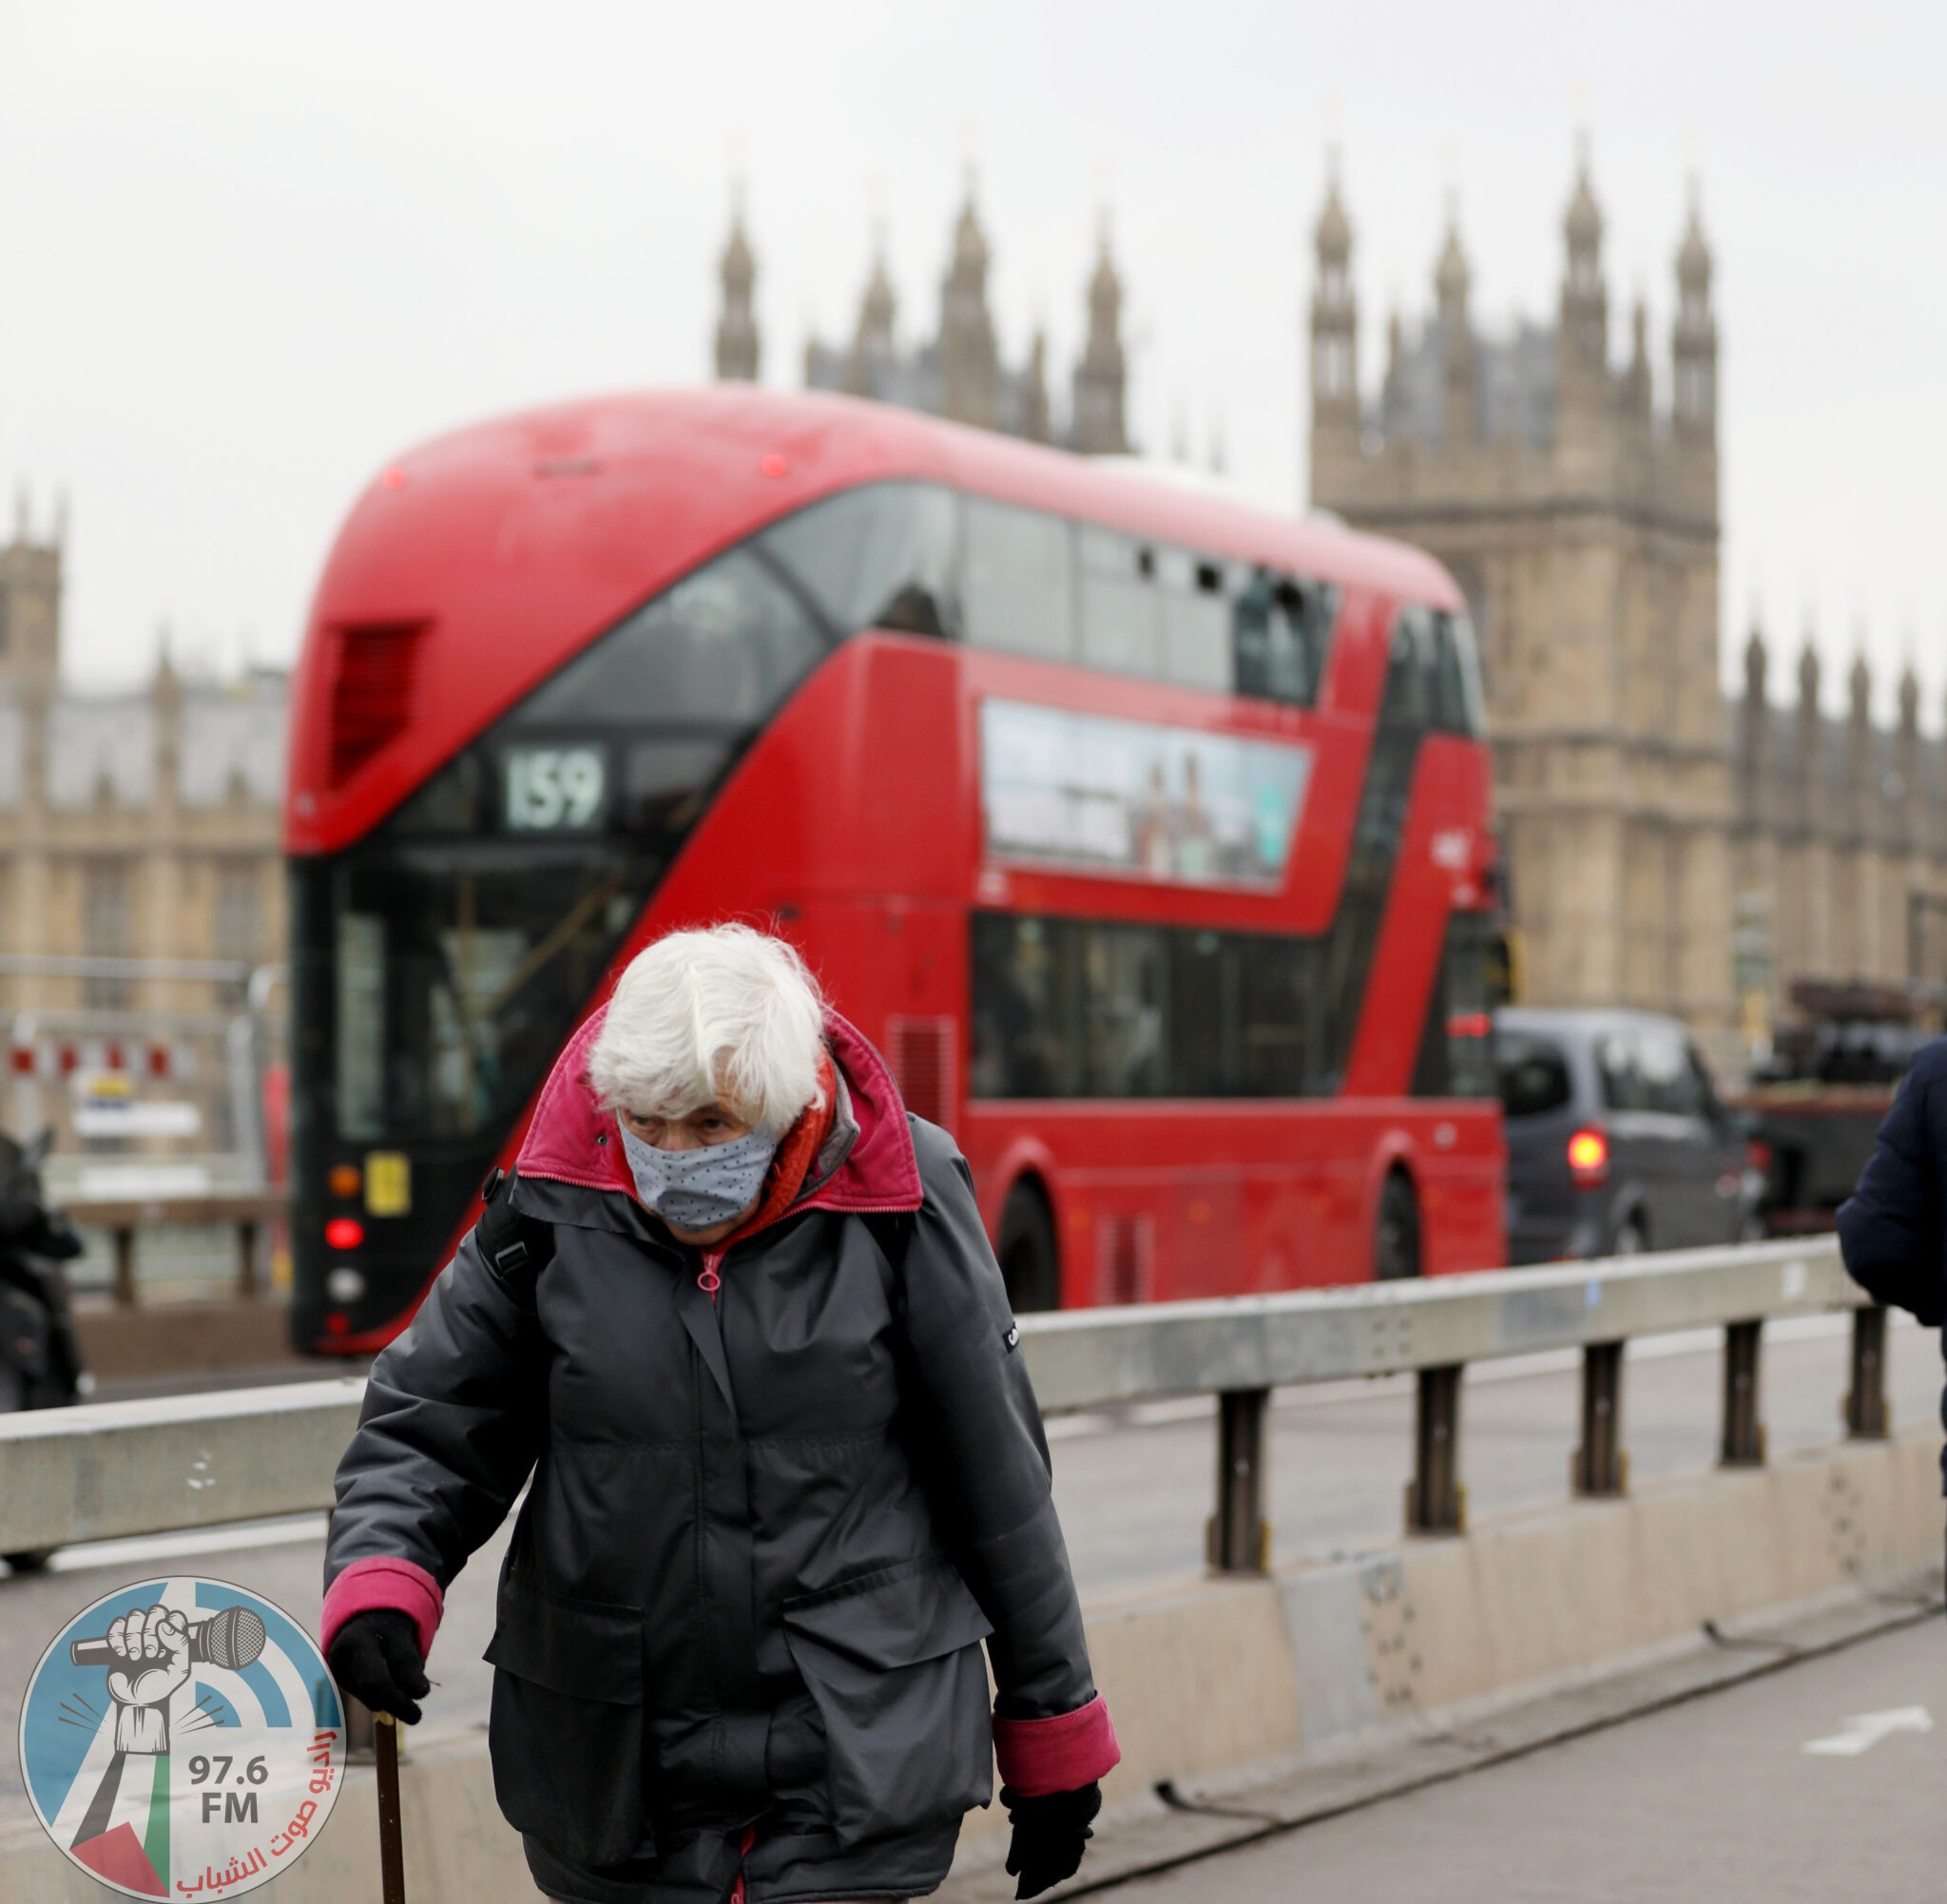 (211124) -- LONDON, Nov. 24, 2021 (Xinhua) -- A woman wearing a face mask walks along Westminster Bridge in London, Britain, on Nov. 24, 2021. Britain registered 43,676 new COVID-19 infections, bringing the total number of coronavirus cases in the country to 9,974,843, according to official figures released Wednesday. (Xinhua/Li Ying)